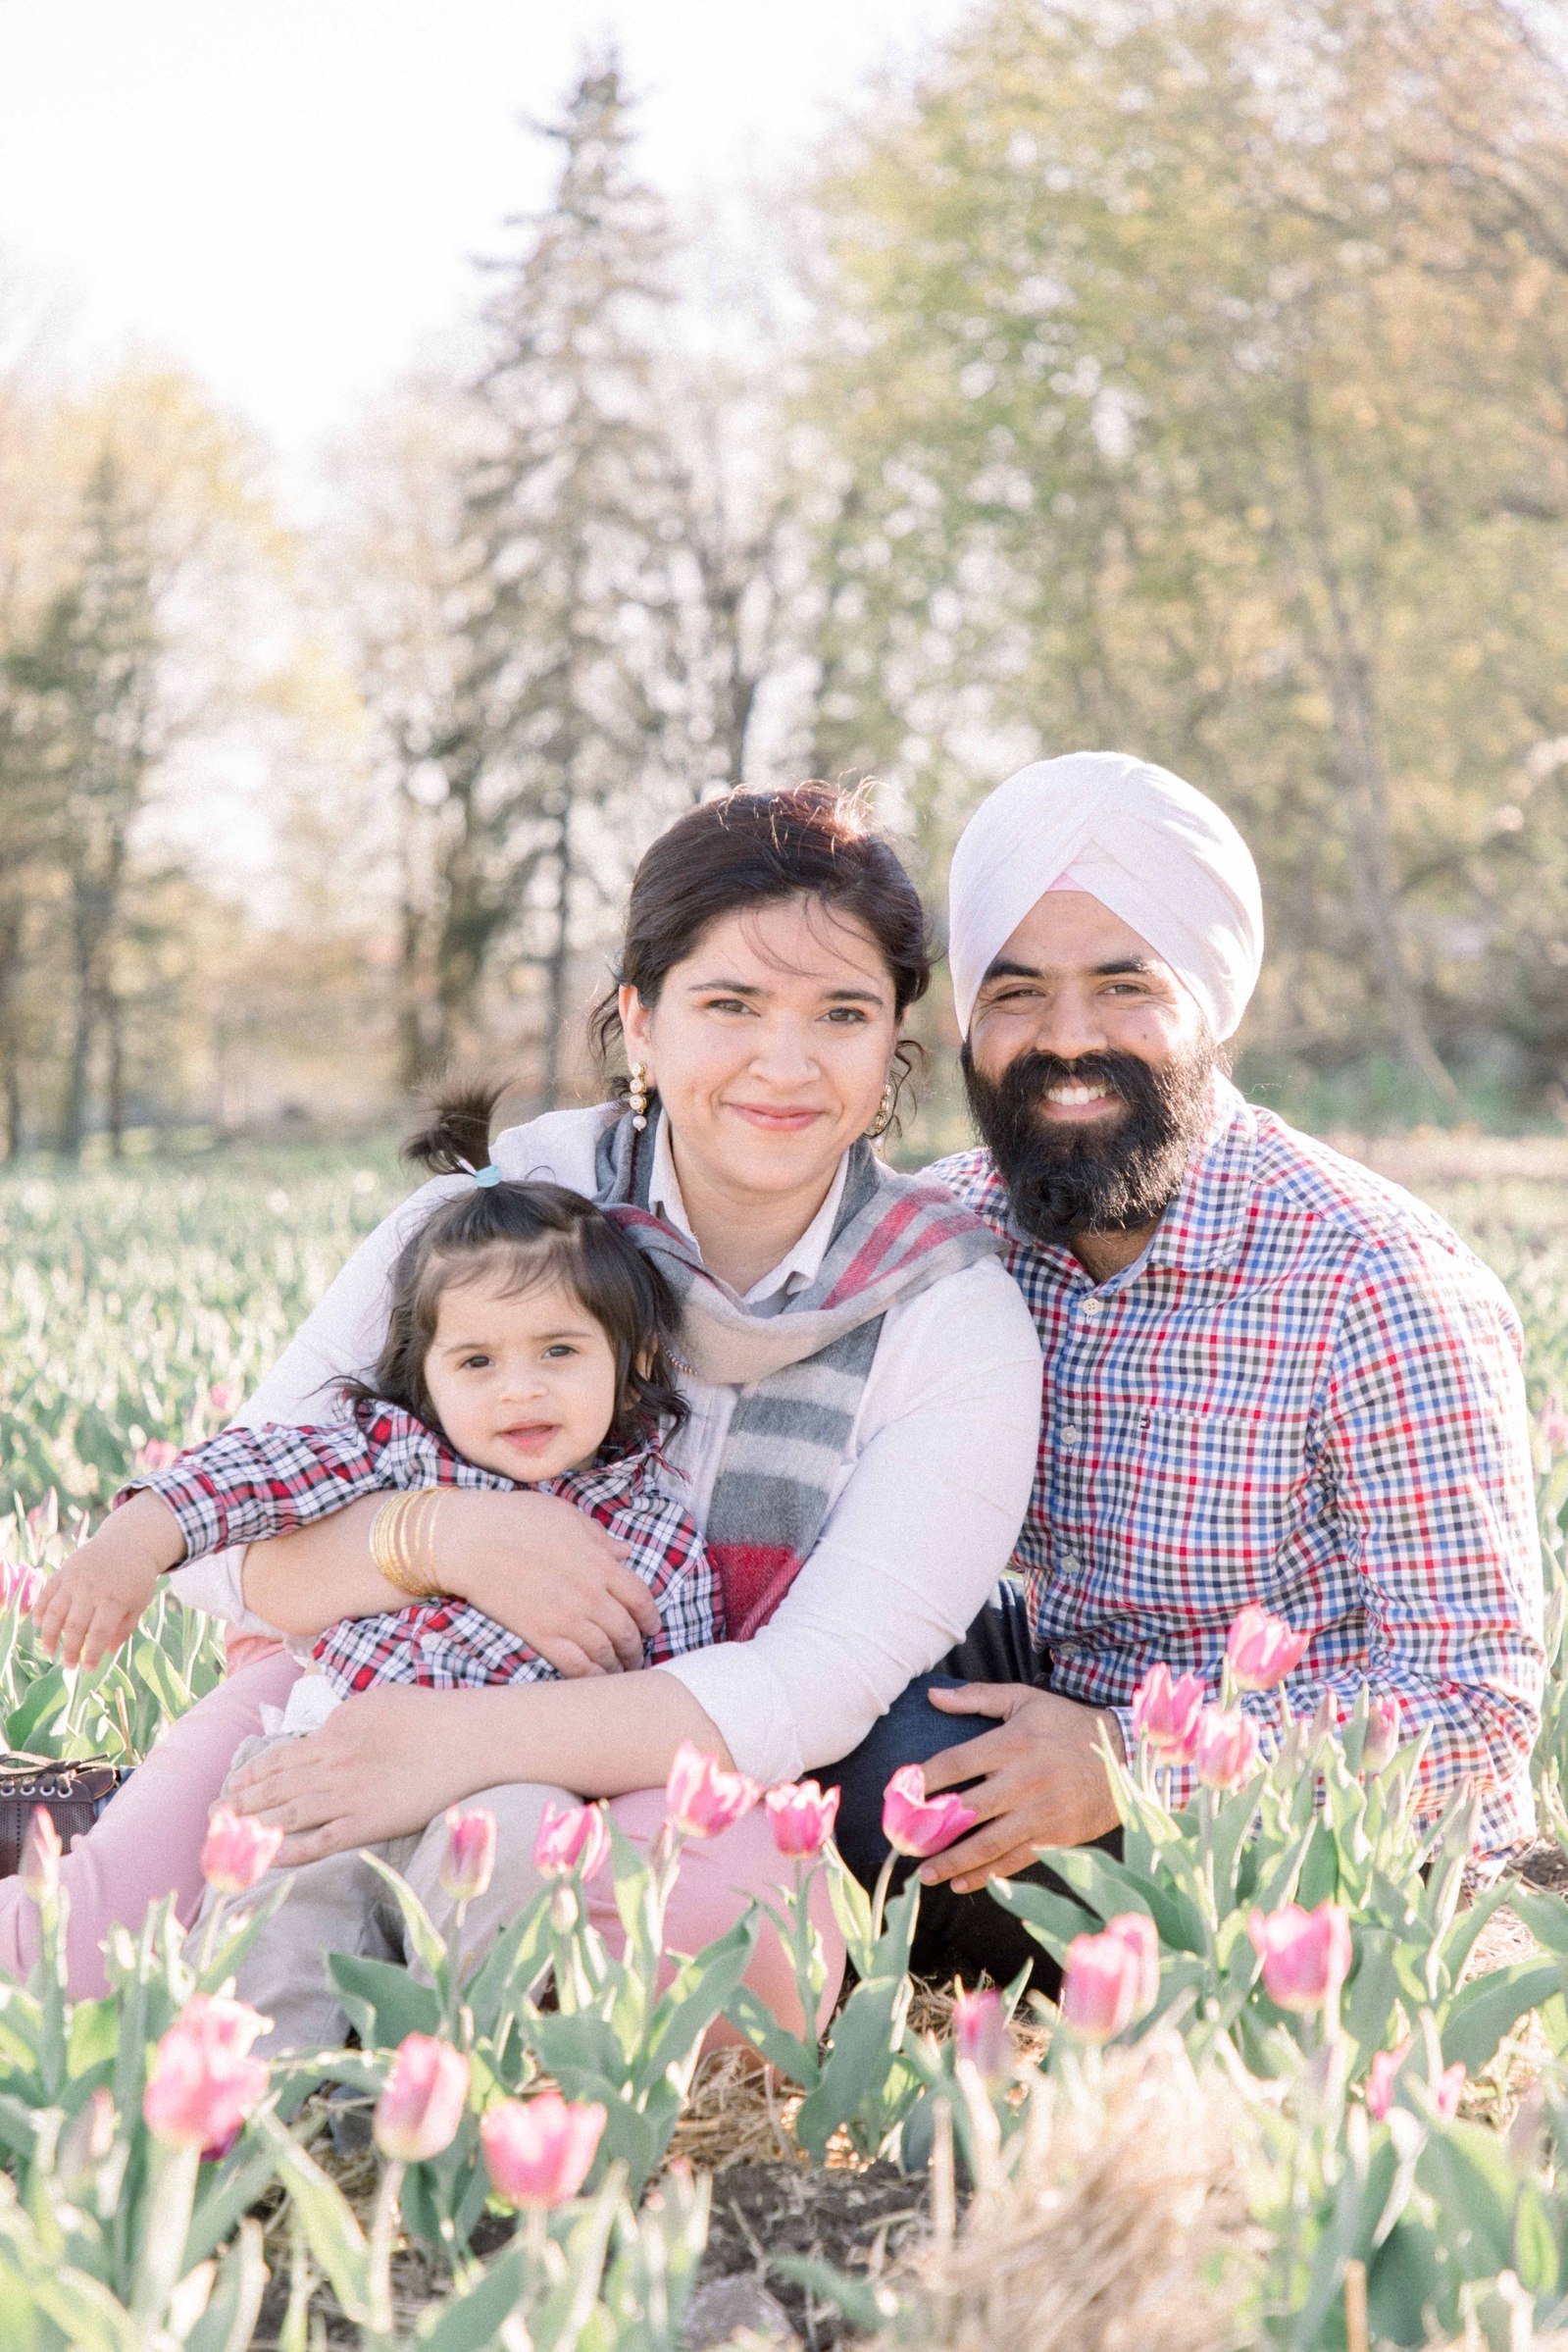 Portrait of family of three sitting in a tulip field, looking at the camera and smiling. Vankleek Hill Portrait Photographer, L'Orignal, Champlain, Prescott-Russell, Family Photography, Candid Photography, Emily VanderBeek Photography.